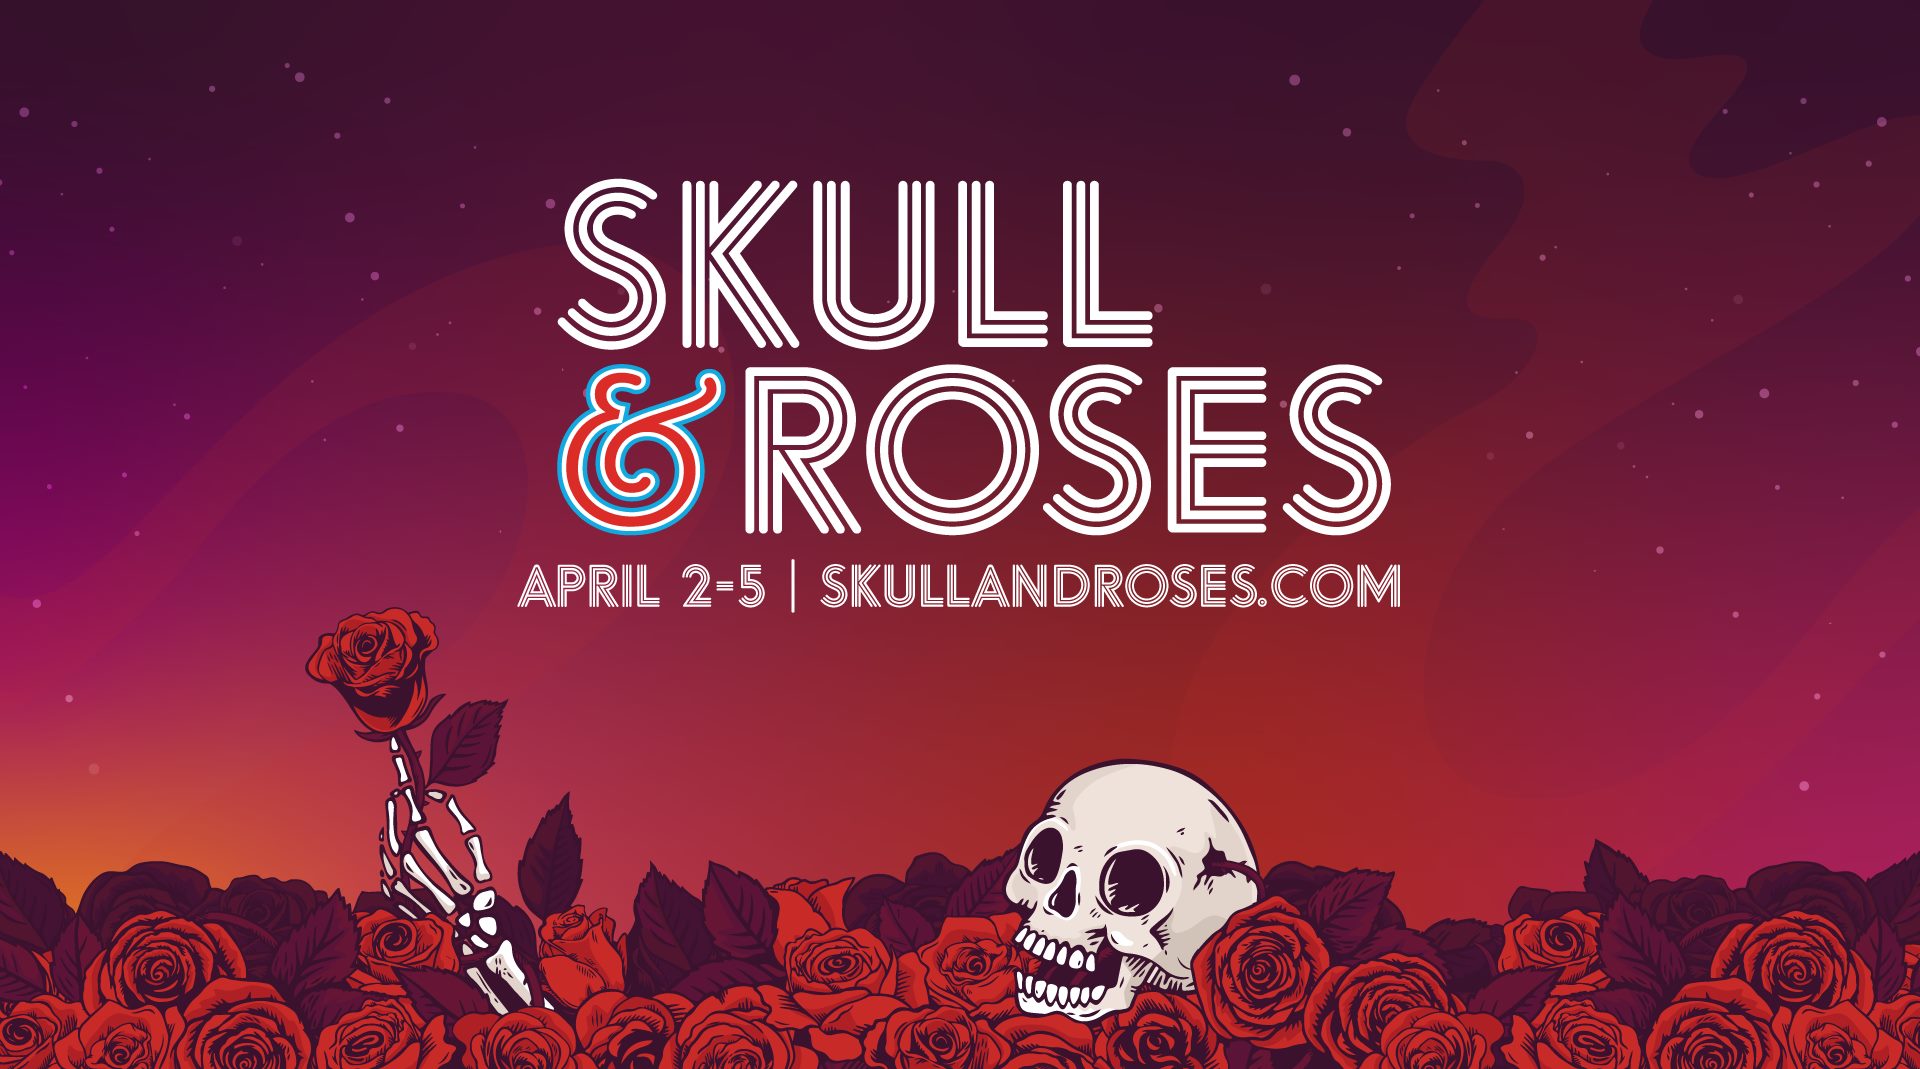 George Porter Jr. will perform at this year's Skull & Roses fest